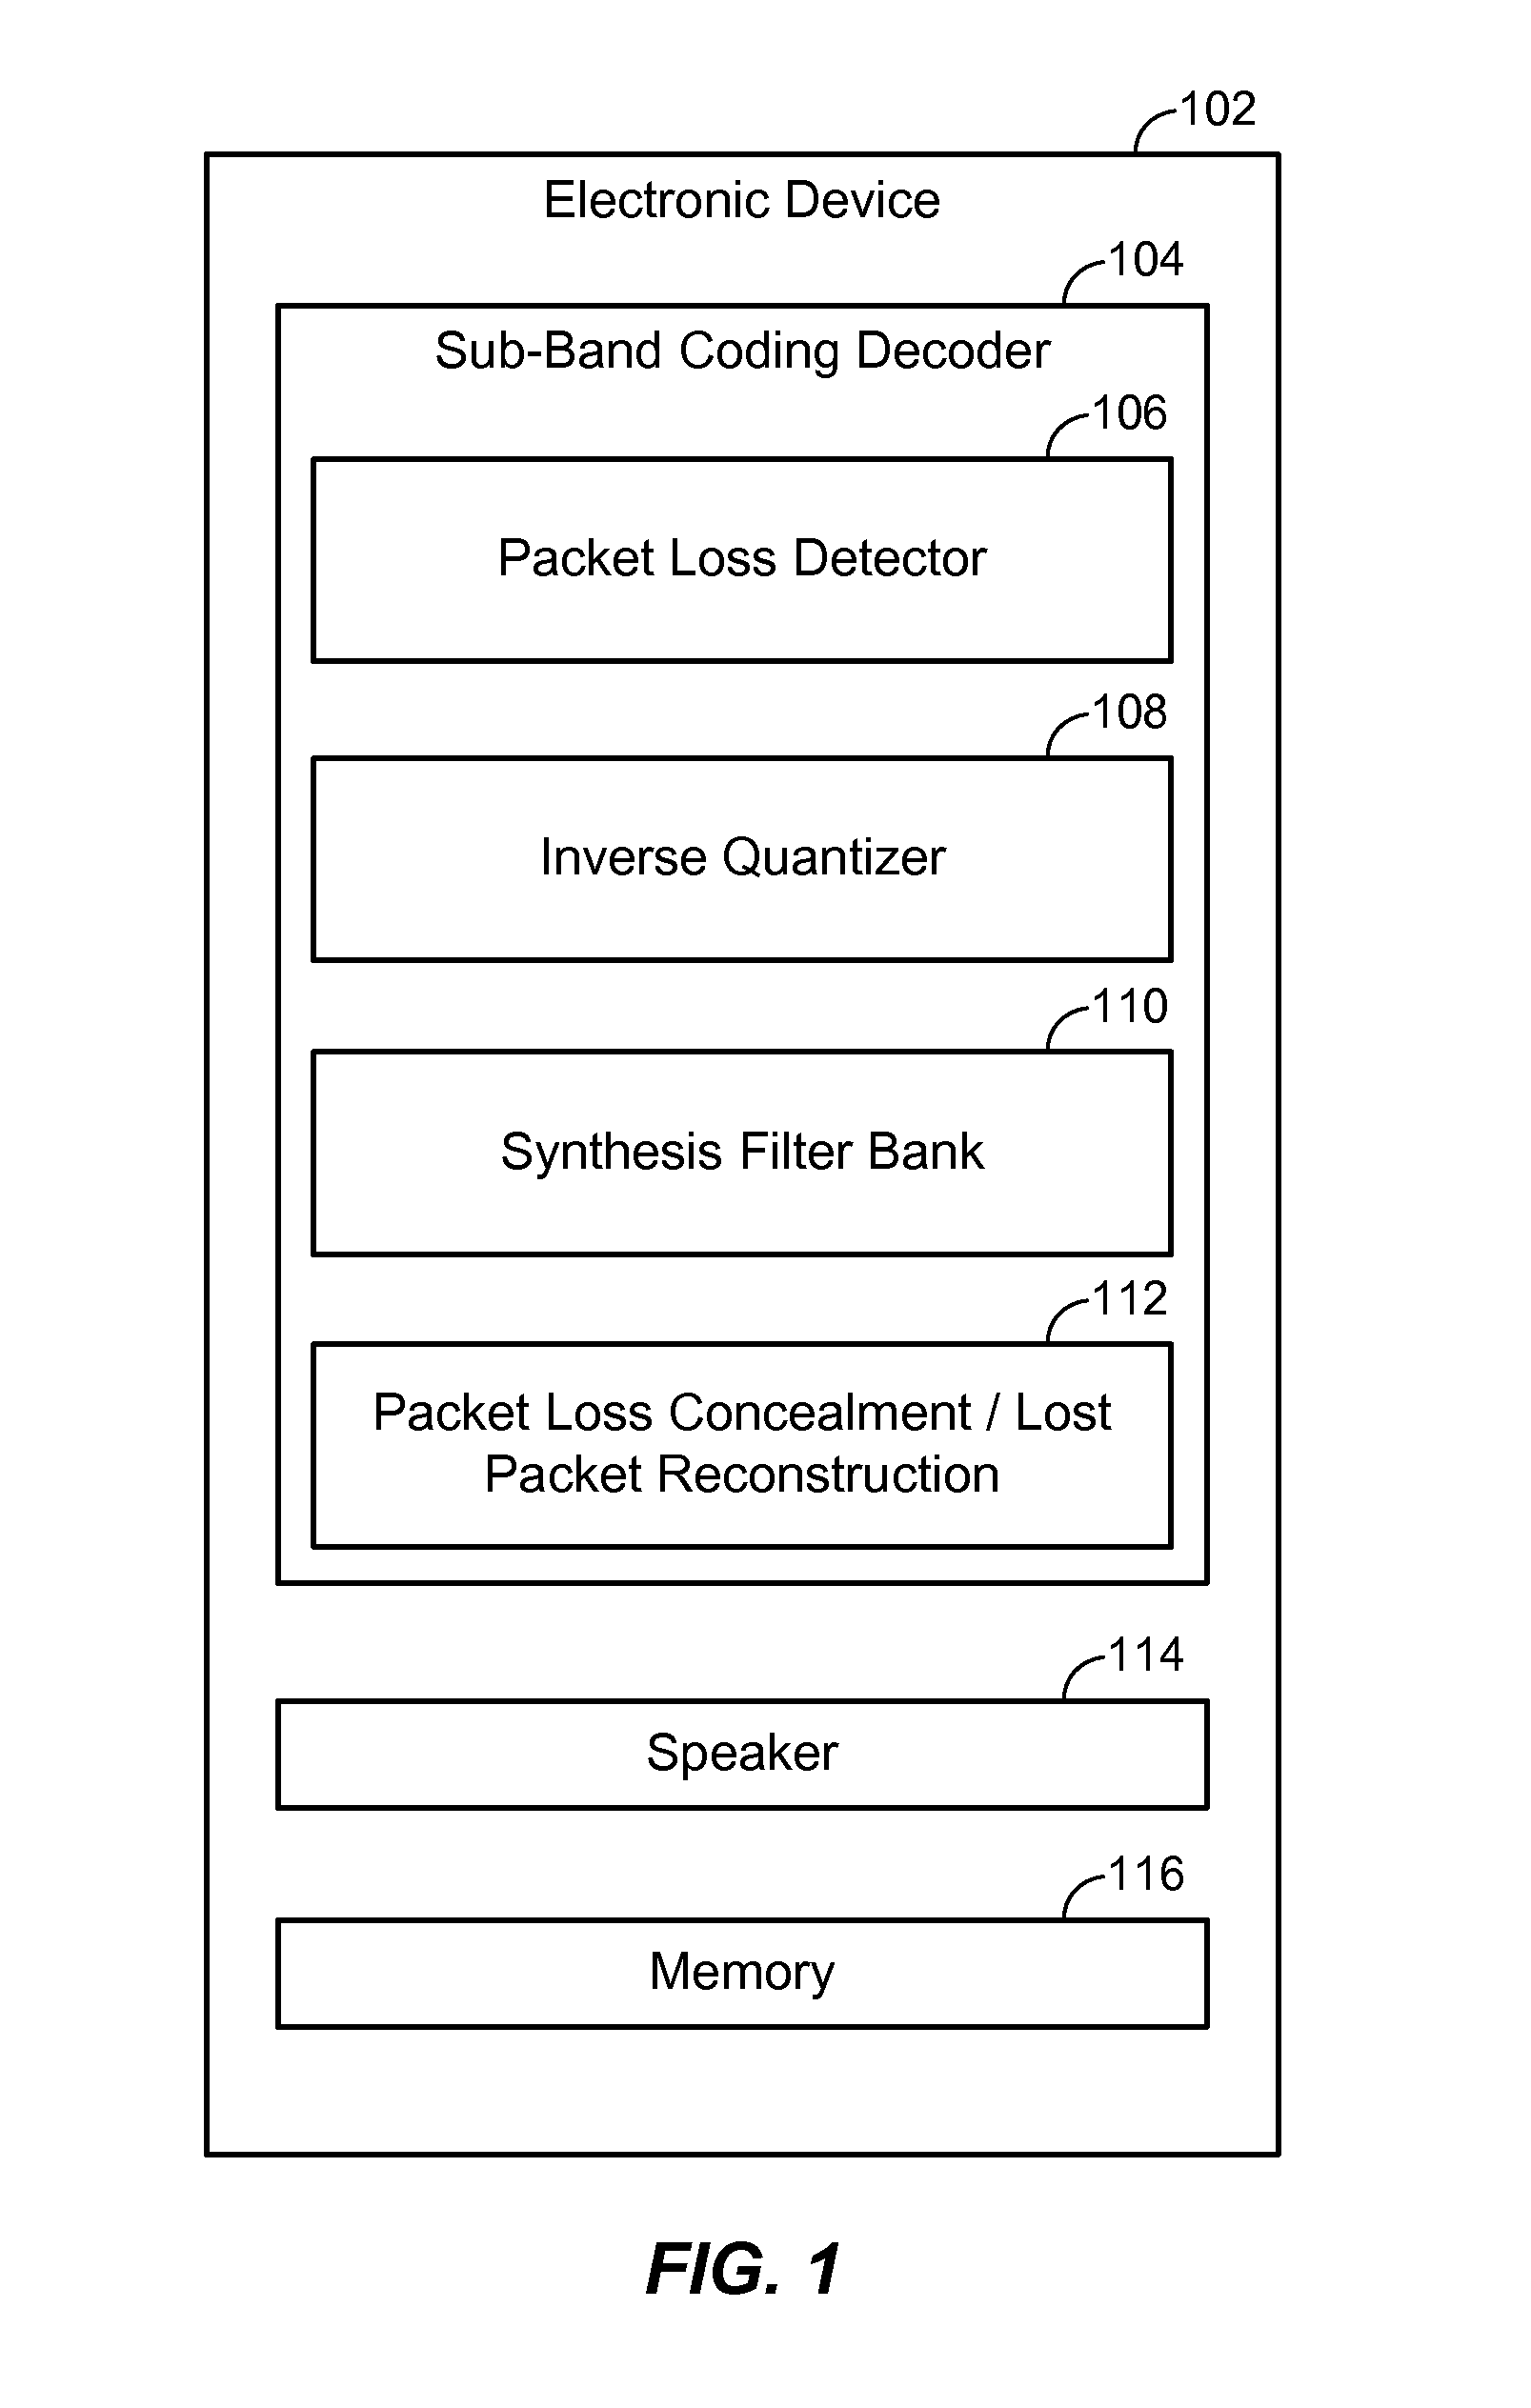 Concealing lost packets in a sub-band coding decoder